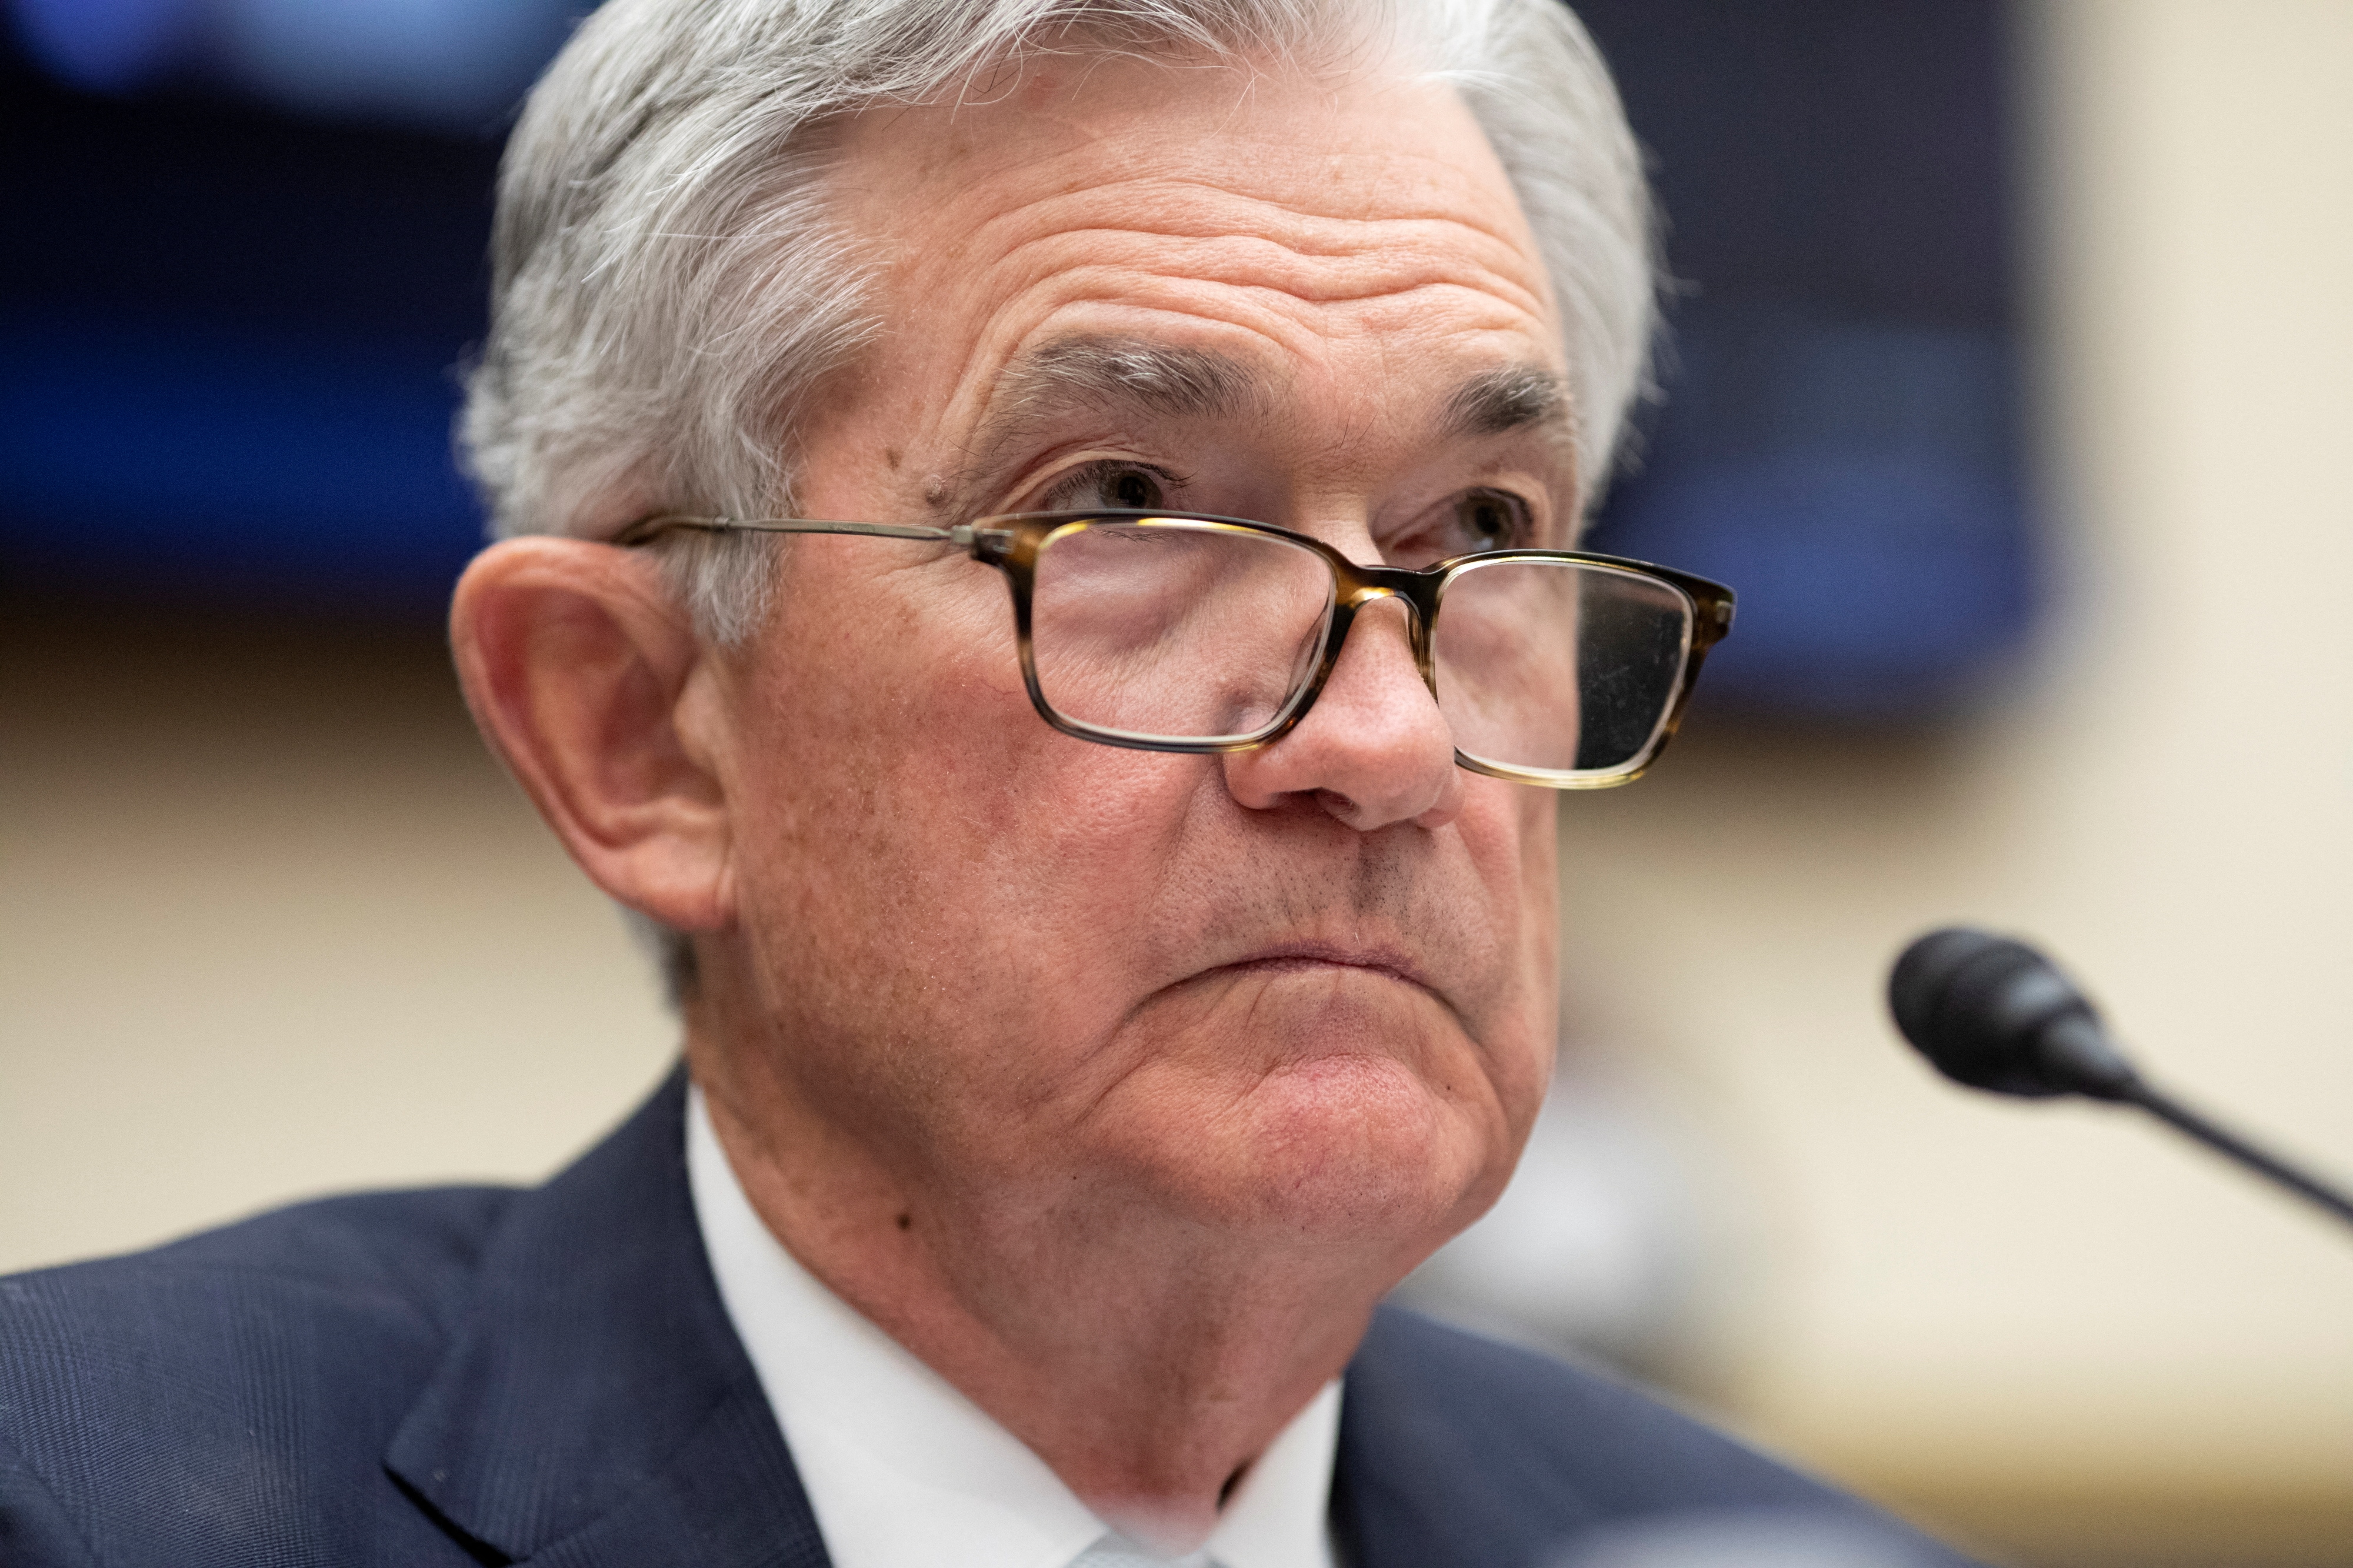 Federal Reserve chief Jerome Powell testifies before a U.S. House Financial Services Committee hearing on Capitol Hill in Washington